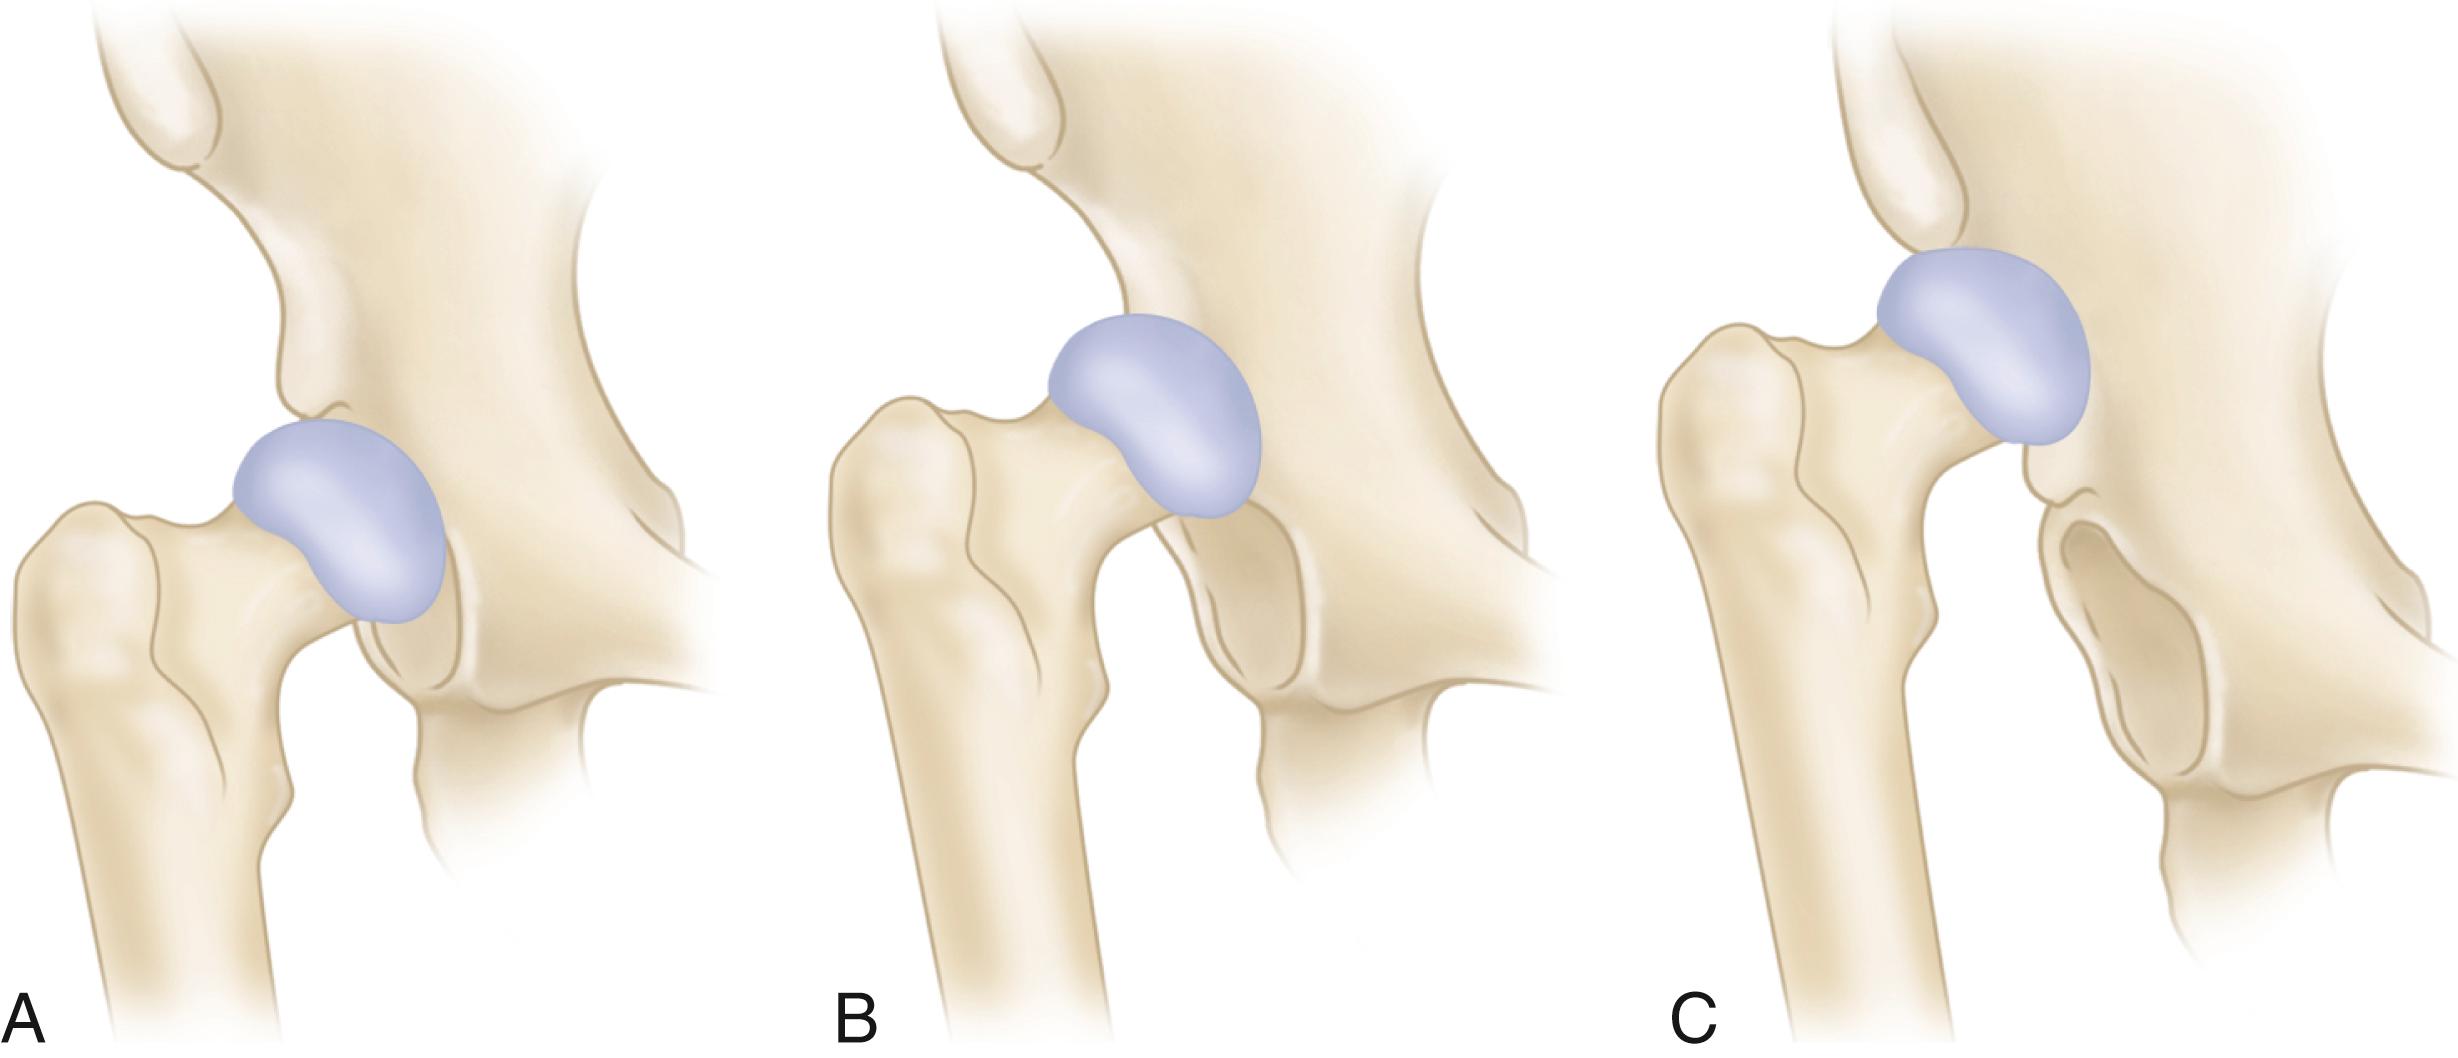 FIGURE 3.84, Developmental subluxation or dislocation. A, Dysplastic hip with defect in superior aspect of acetabulum. B, Intermediate congenital dislocation with false acetabulum above true acetabulum, usually with shallow groove connecting two acetabula. C, High dislocation of hip, with some reactive bone on side of ilium where head impinges on cortex.